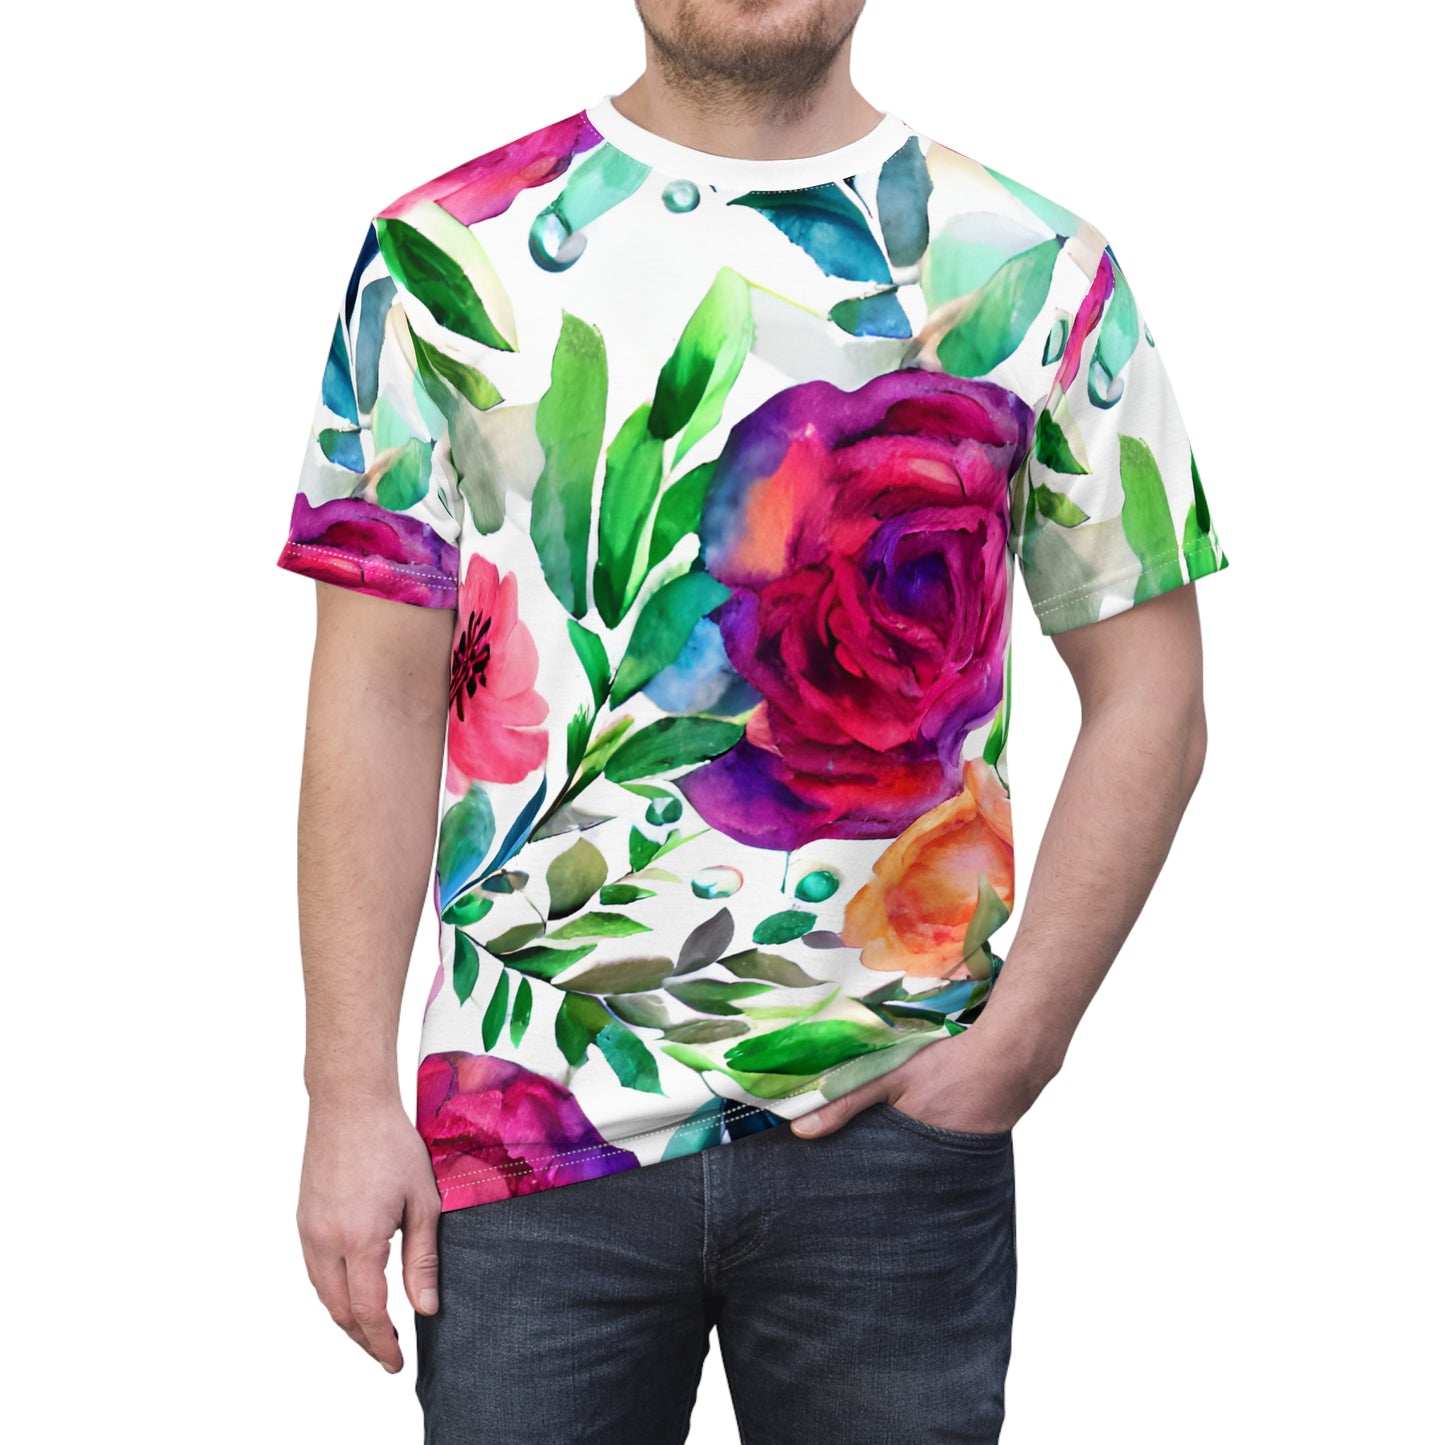 Floral Style, Graffiti Style, Abstract Style, Unisex Cut & Sew Tee